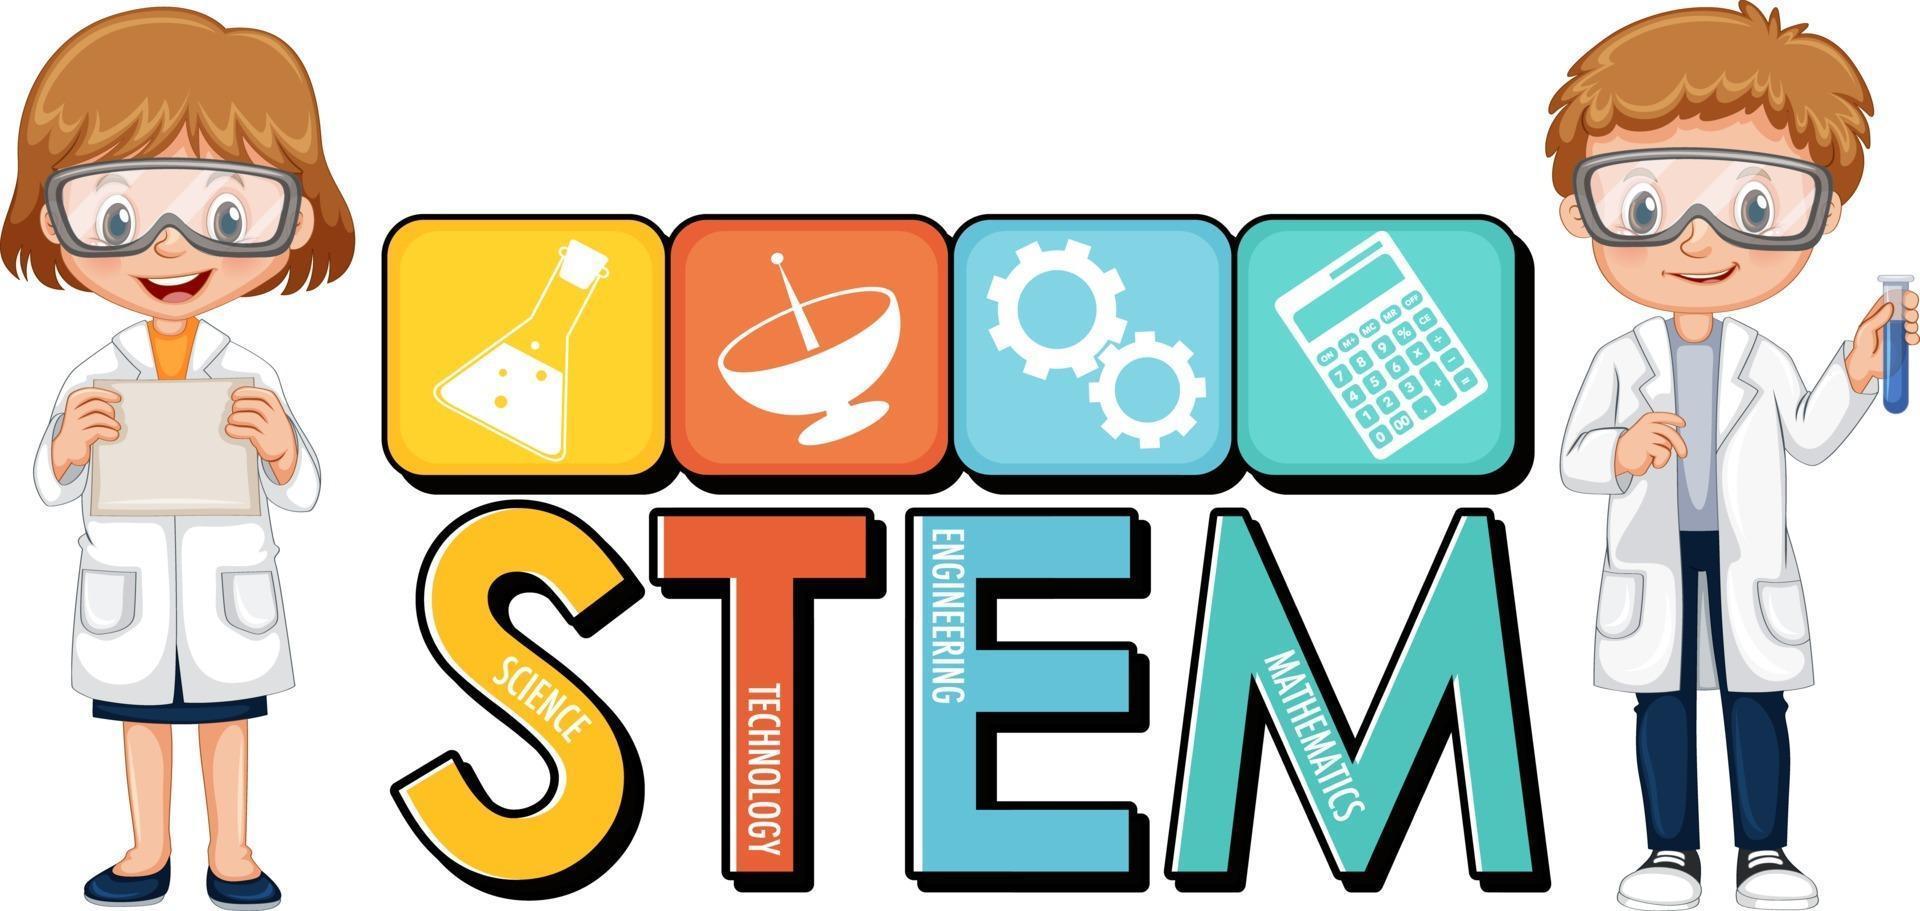 STEM education logo with scientist kids cartoon character vector